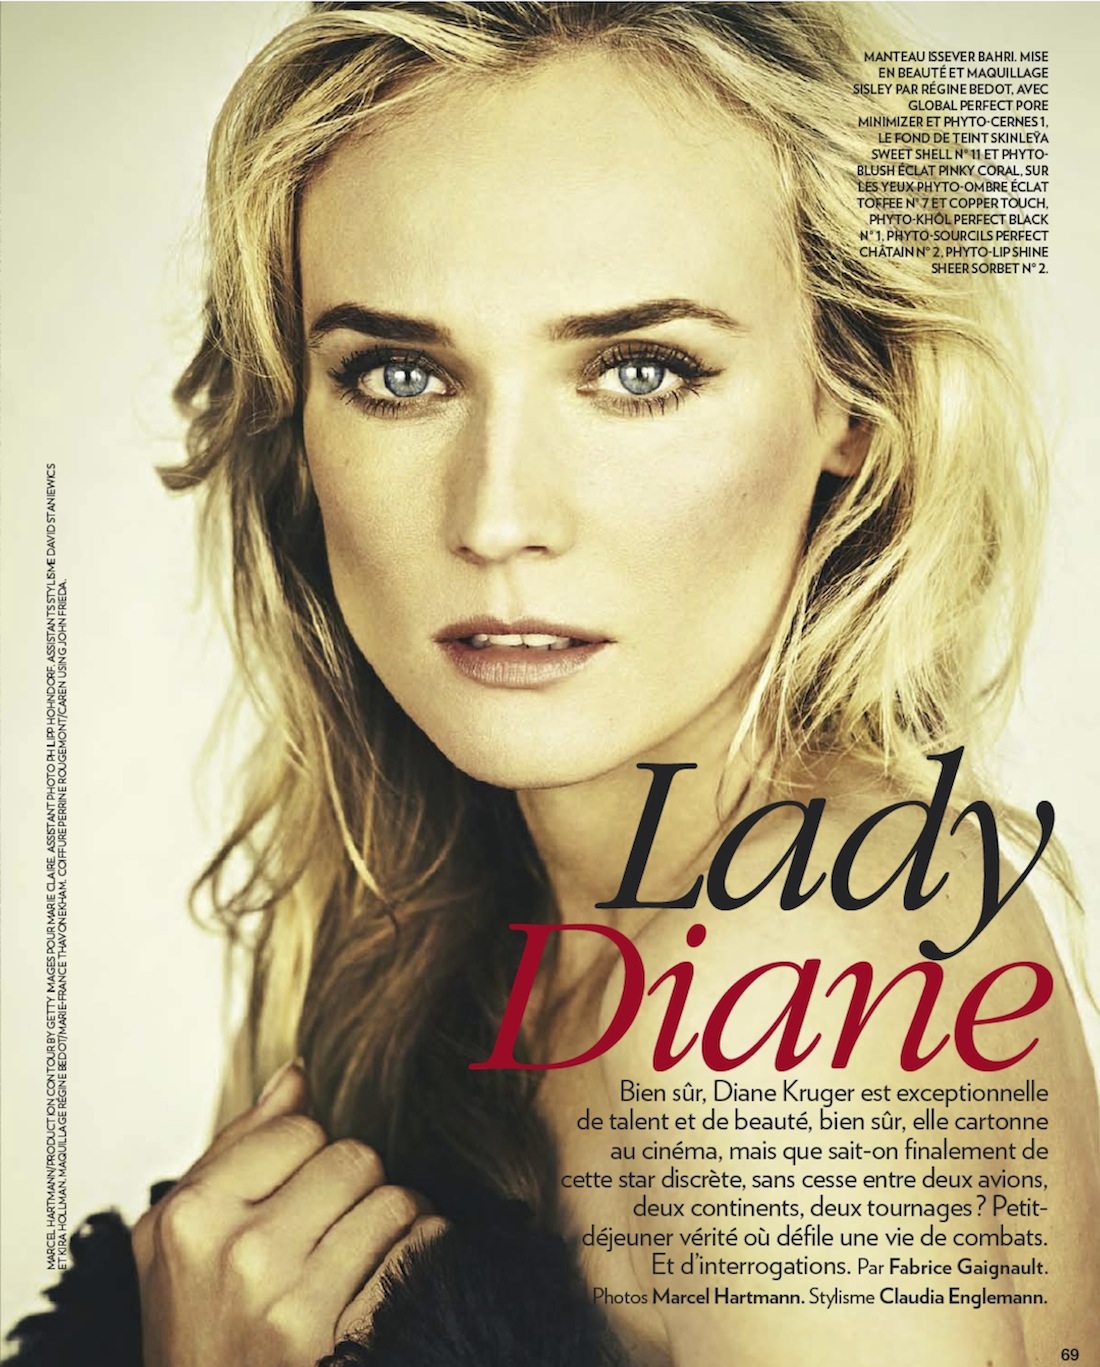 lady diane: diane kruger by marcel hartmann for marie claire france ...